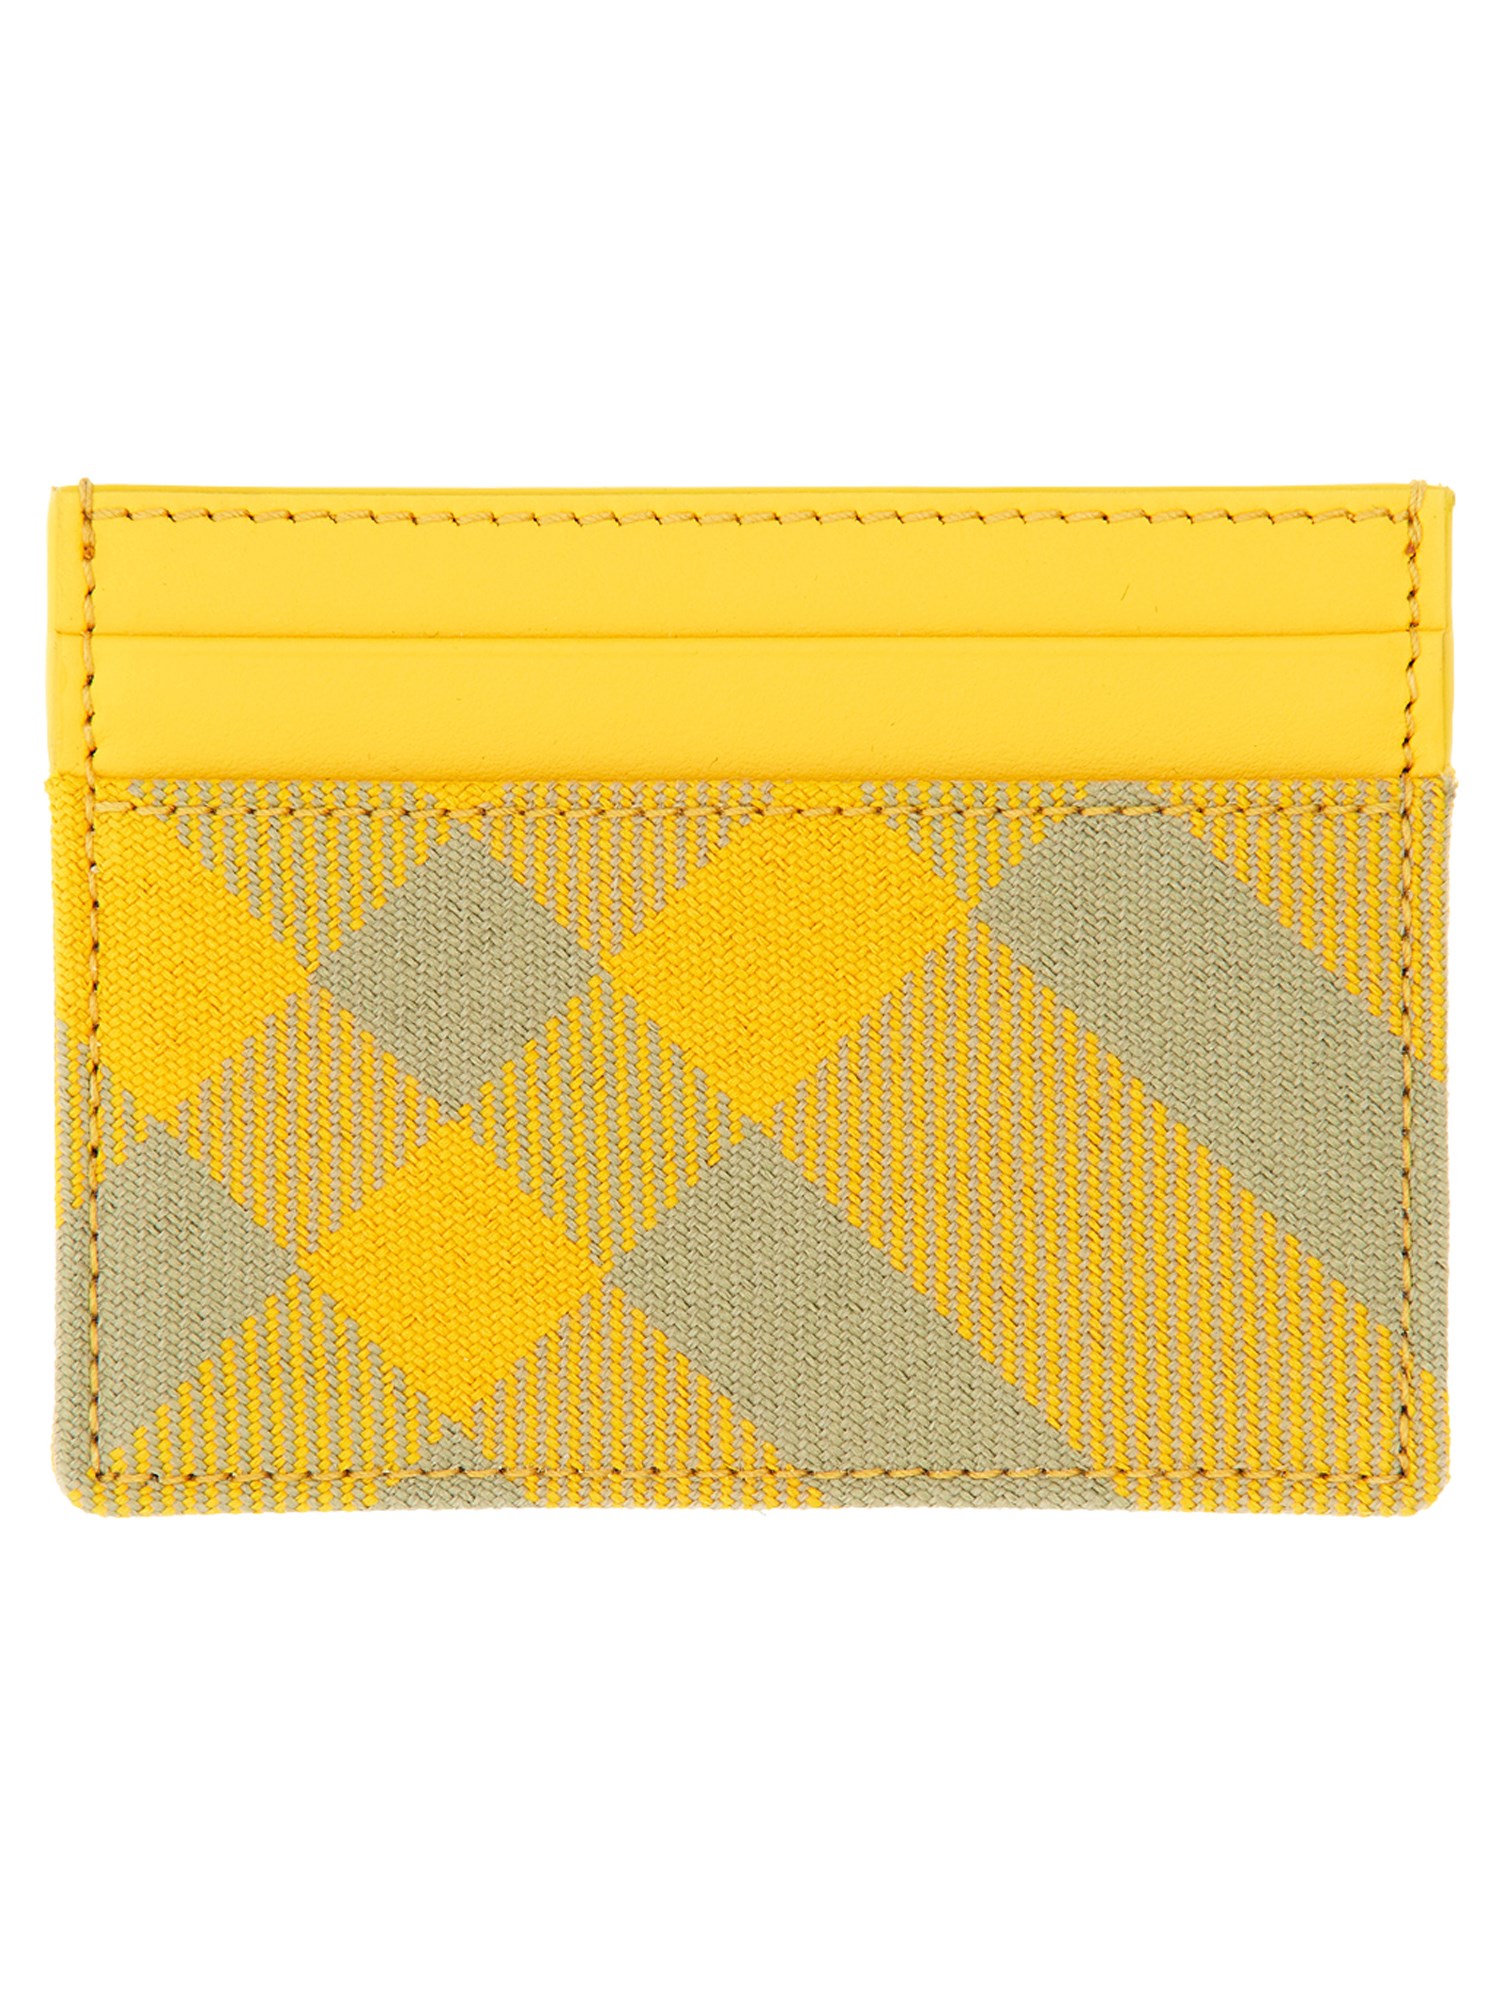 burberry credit card holder check